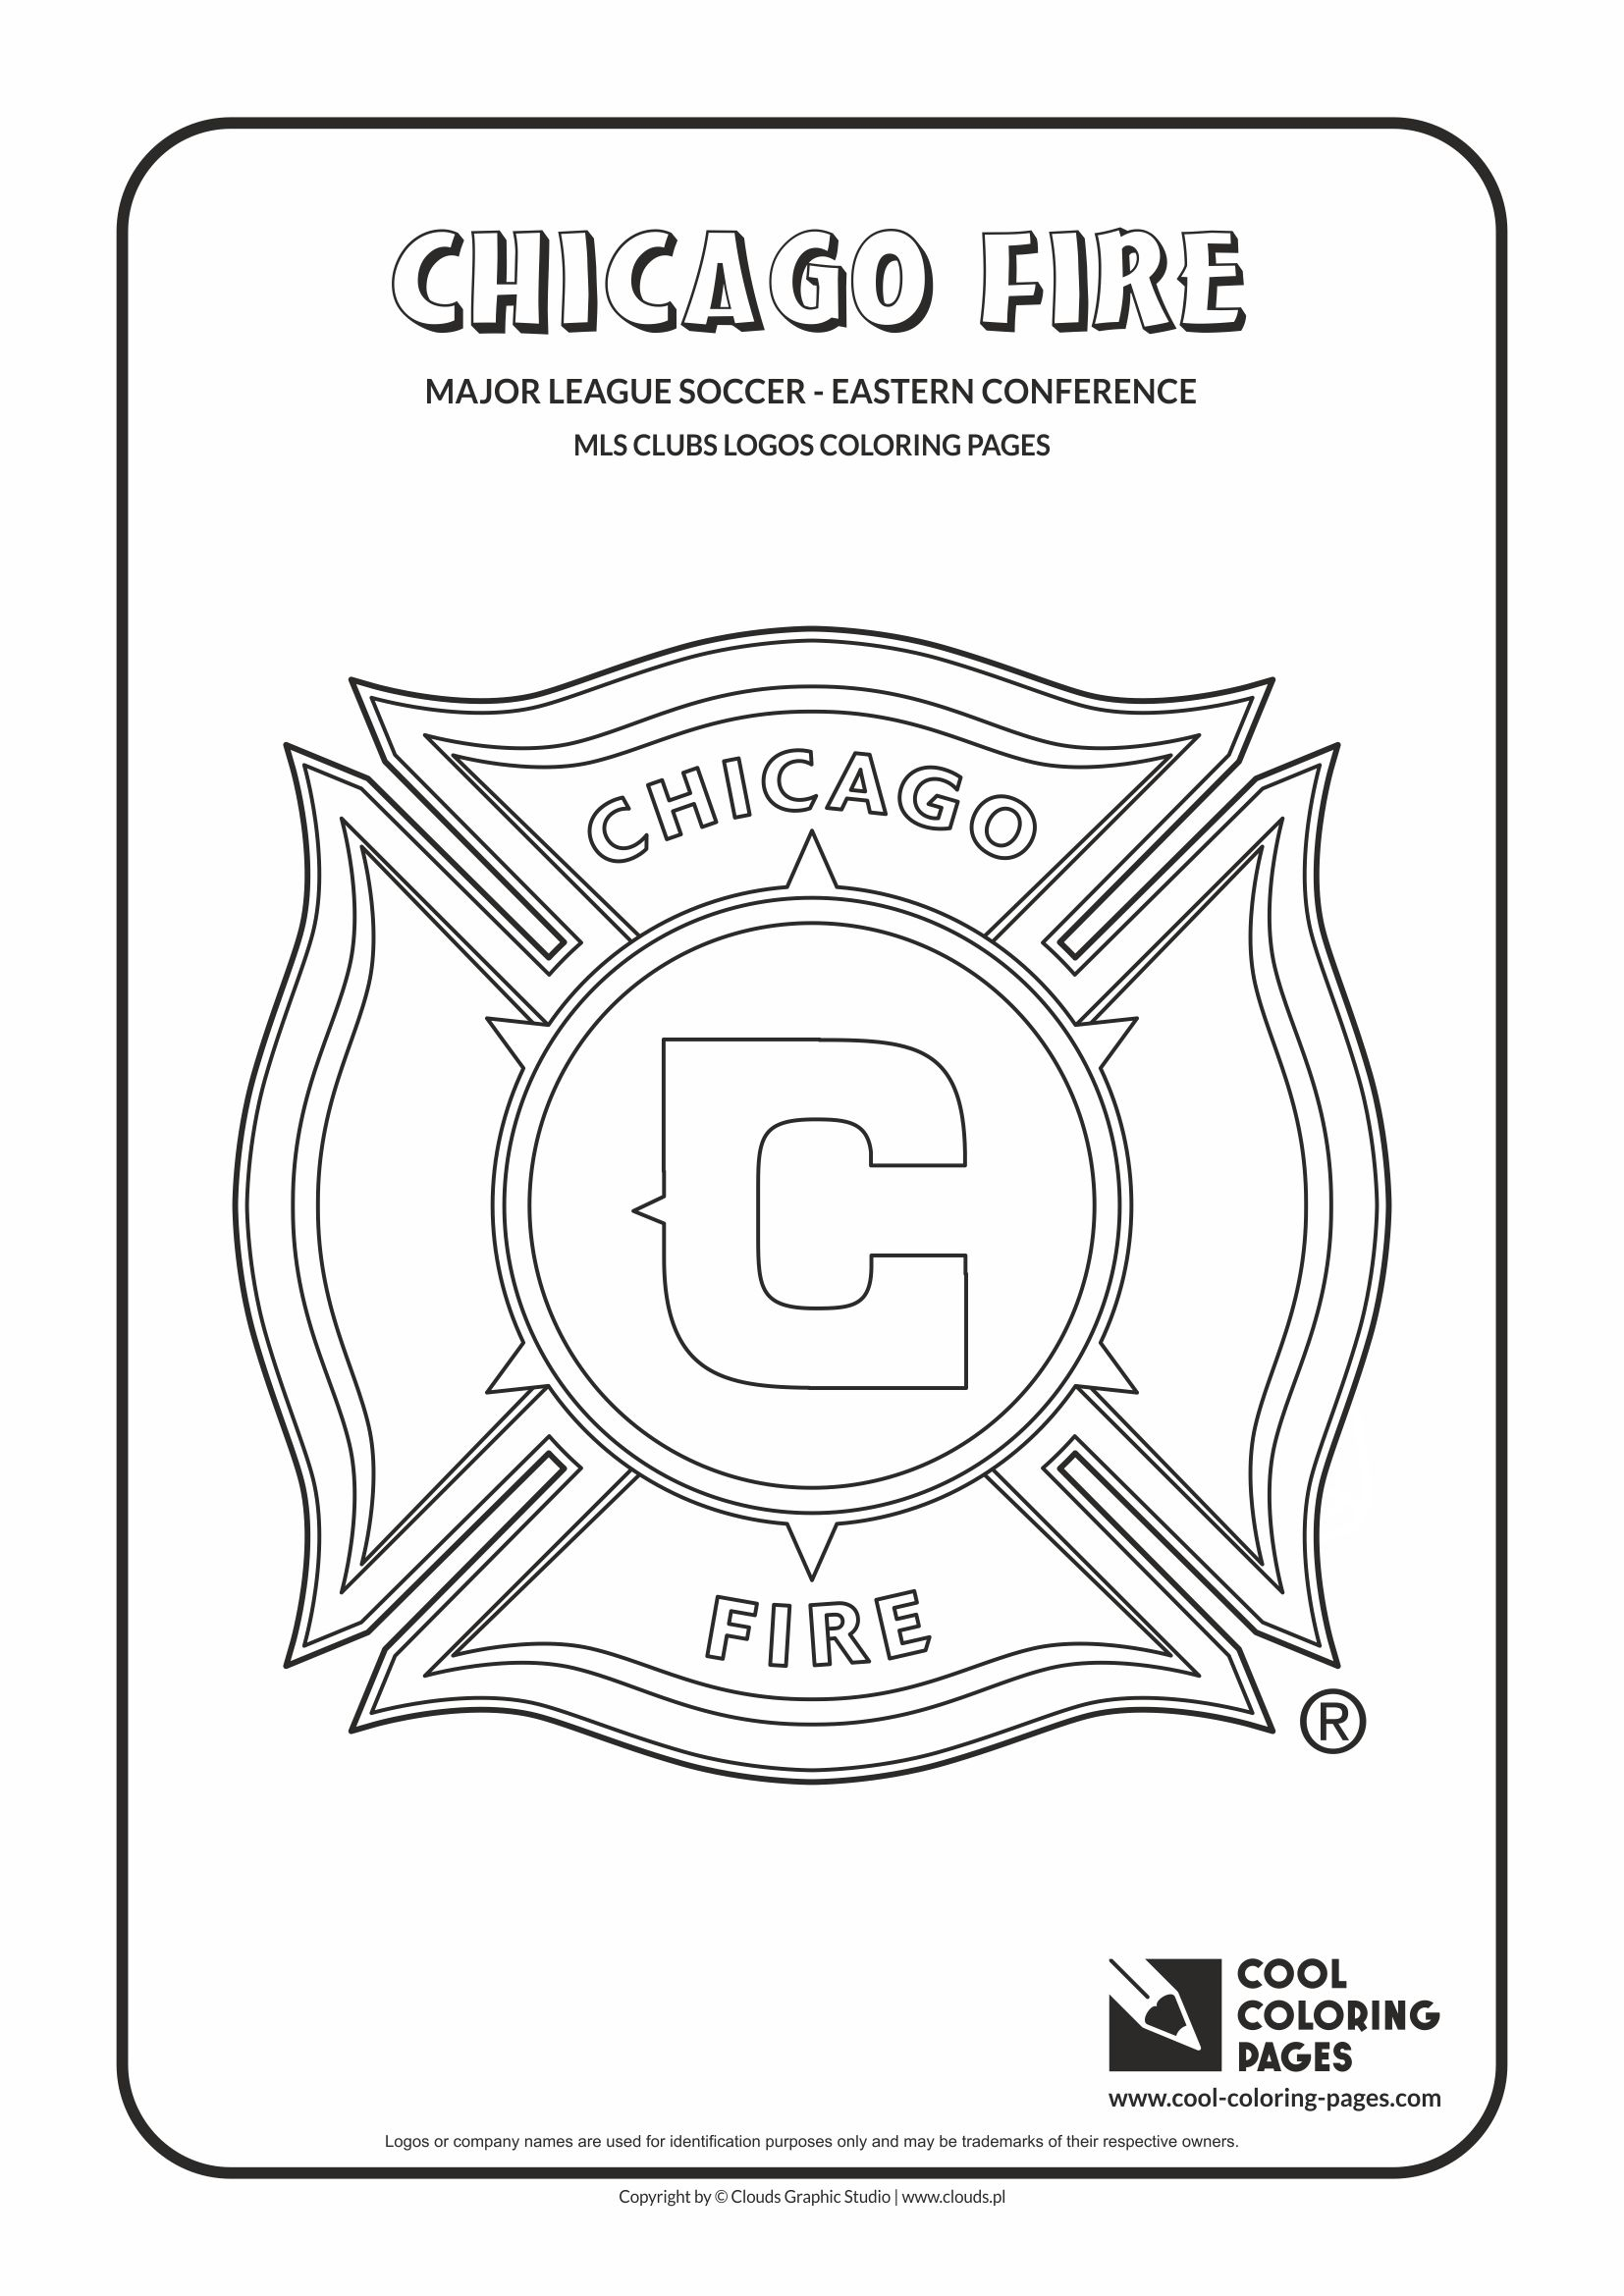 Cool Coloring Pages MLS Soccer Clubs Logos Coloring Pages Cool 